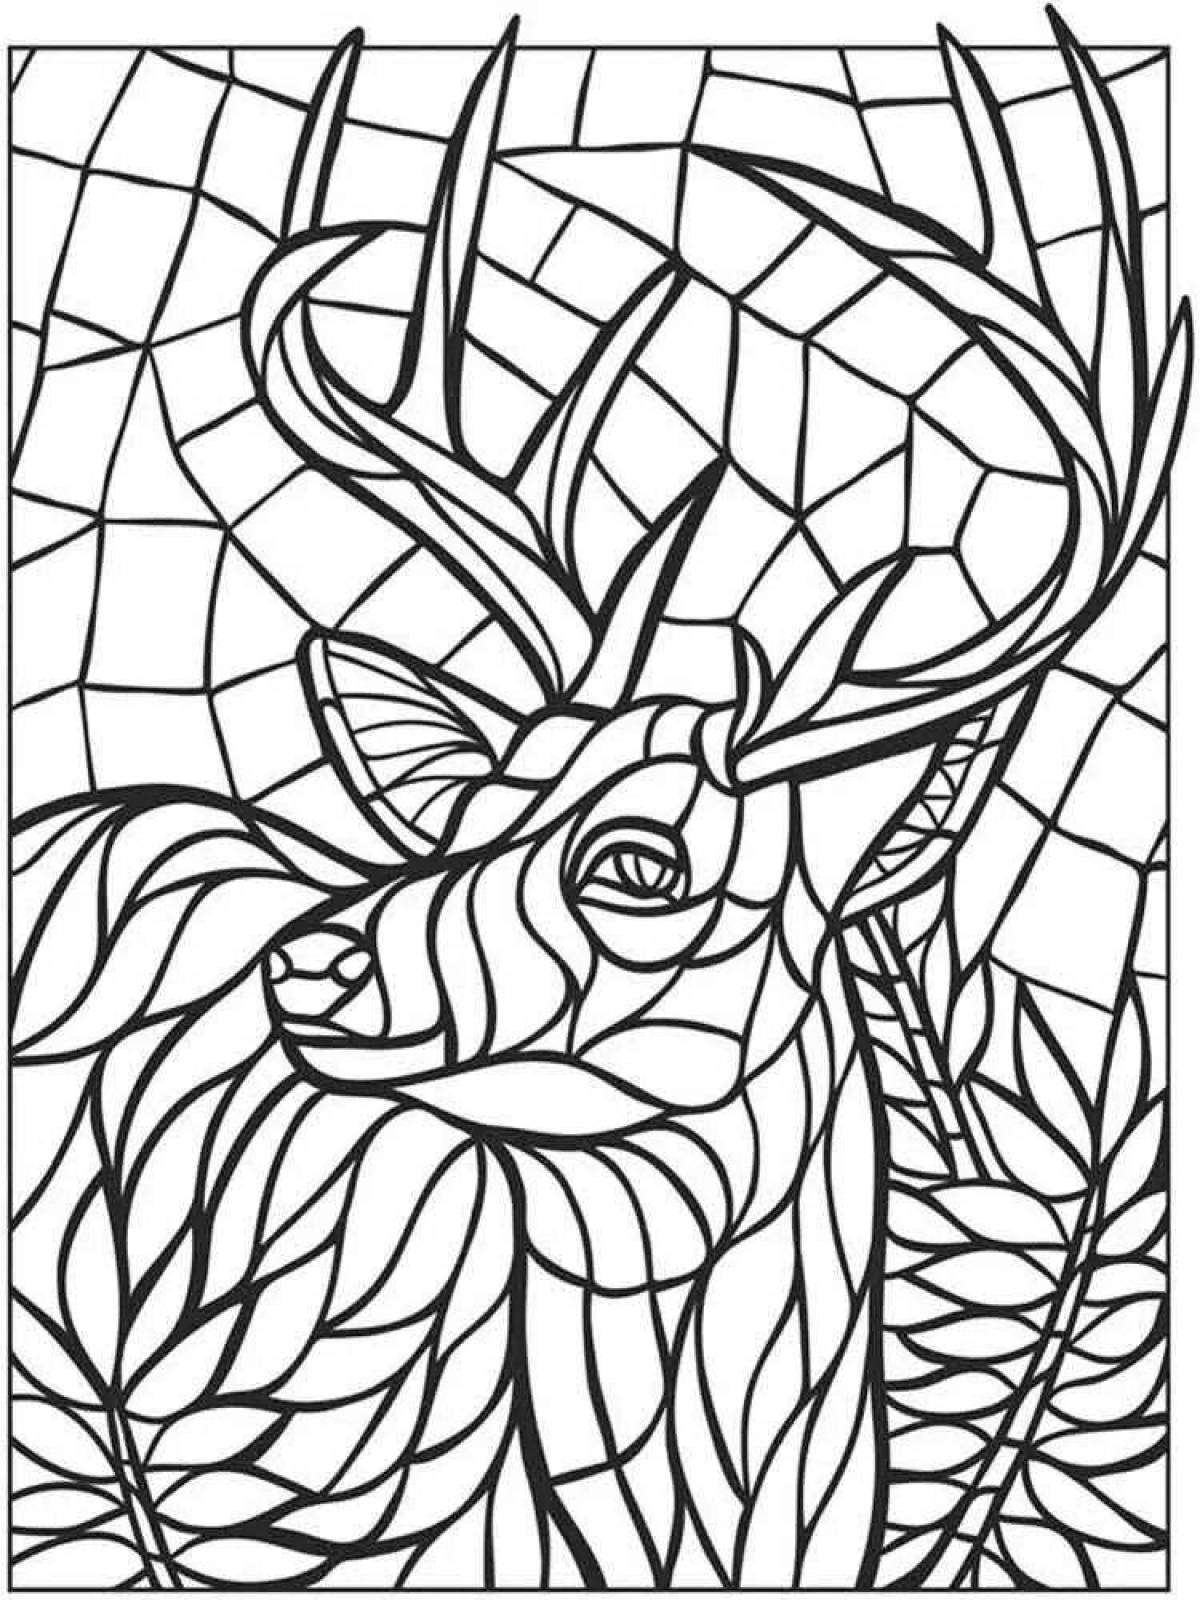 Fine stained glass coloring page